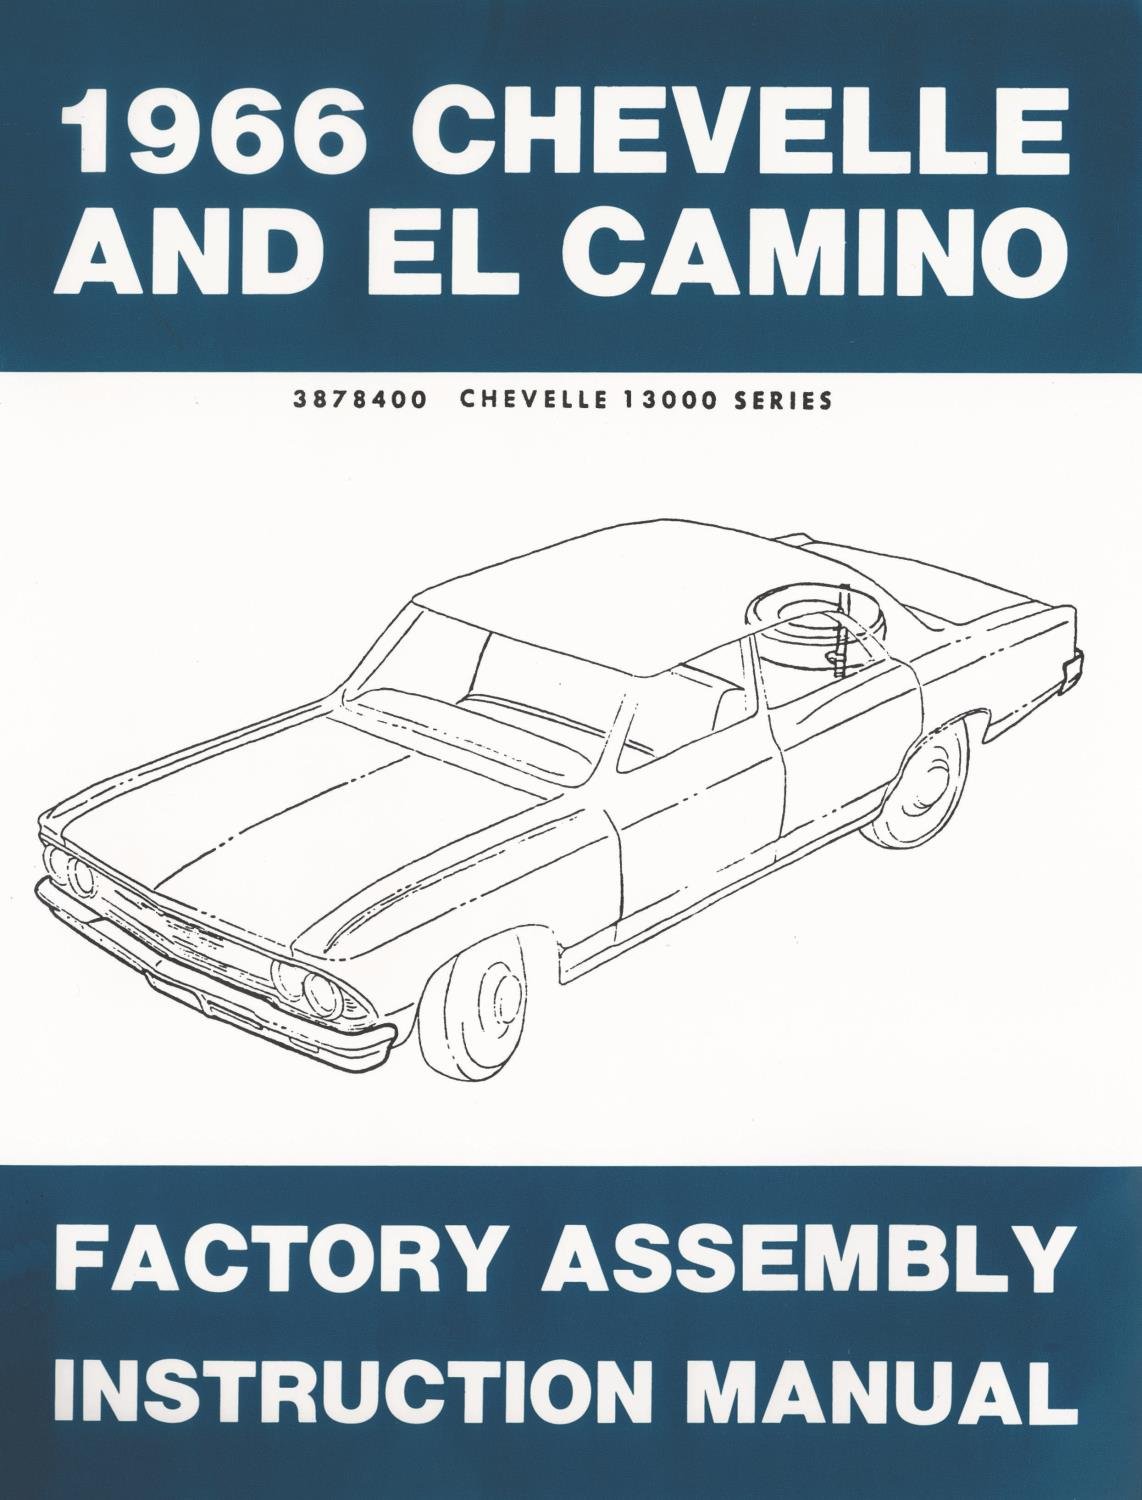 Factory Assembly Instruction Manual for 1966 Chevrolet Chevelle and El Camino